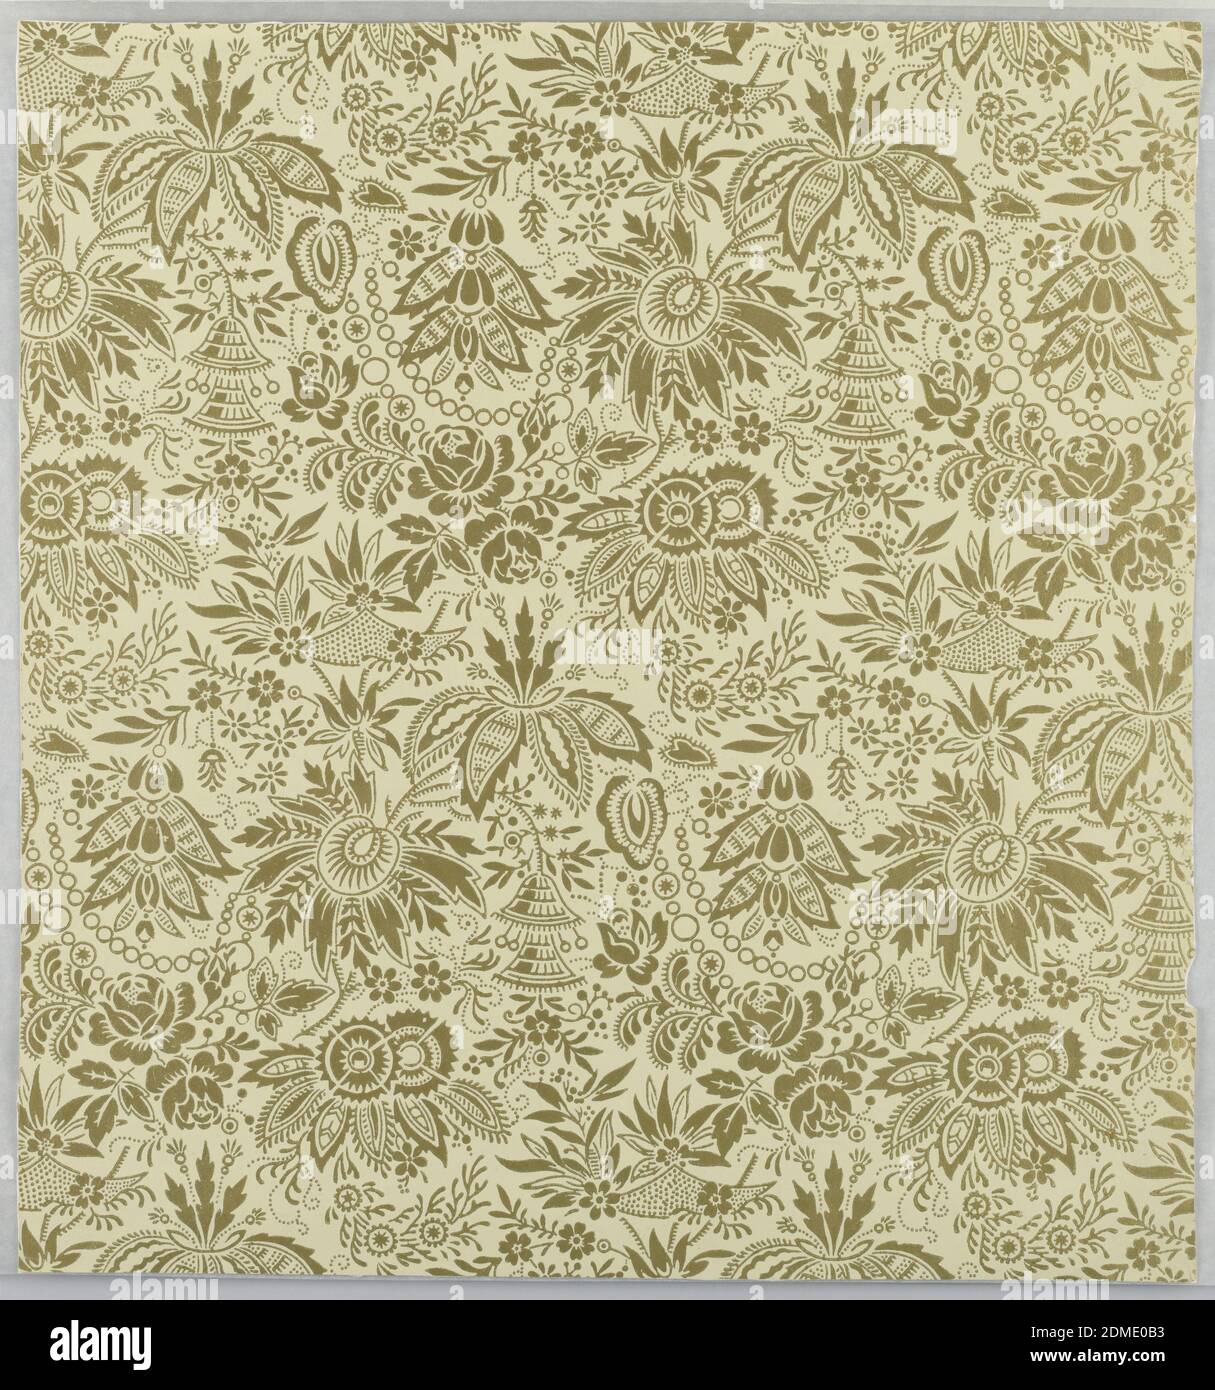 Sidewall, Machine-printed paper, Aesthetic dense all-over pattern with scattered leaves and large fanciful flowers; diamond-shaped pattern repeat in off-set columns; patterned petals and leaves; color scheme of brown on cream ground., USA, ca. 1880, Wallcoverings, Sidewall Stock Photo